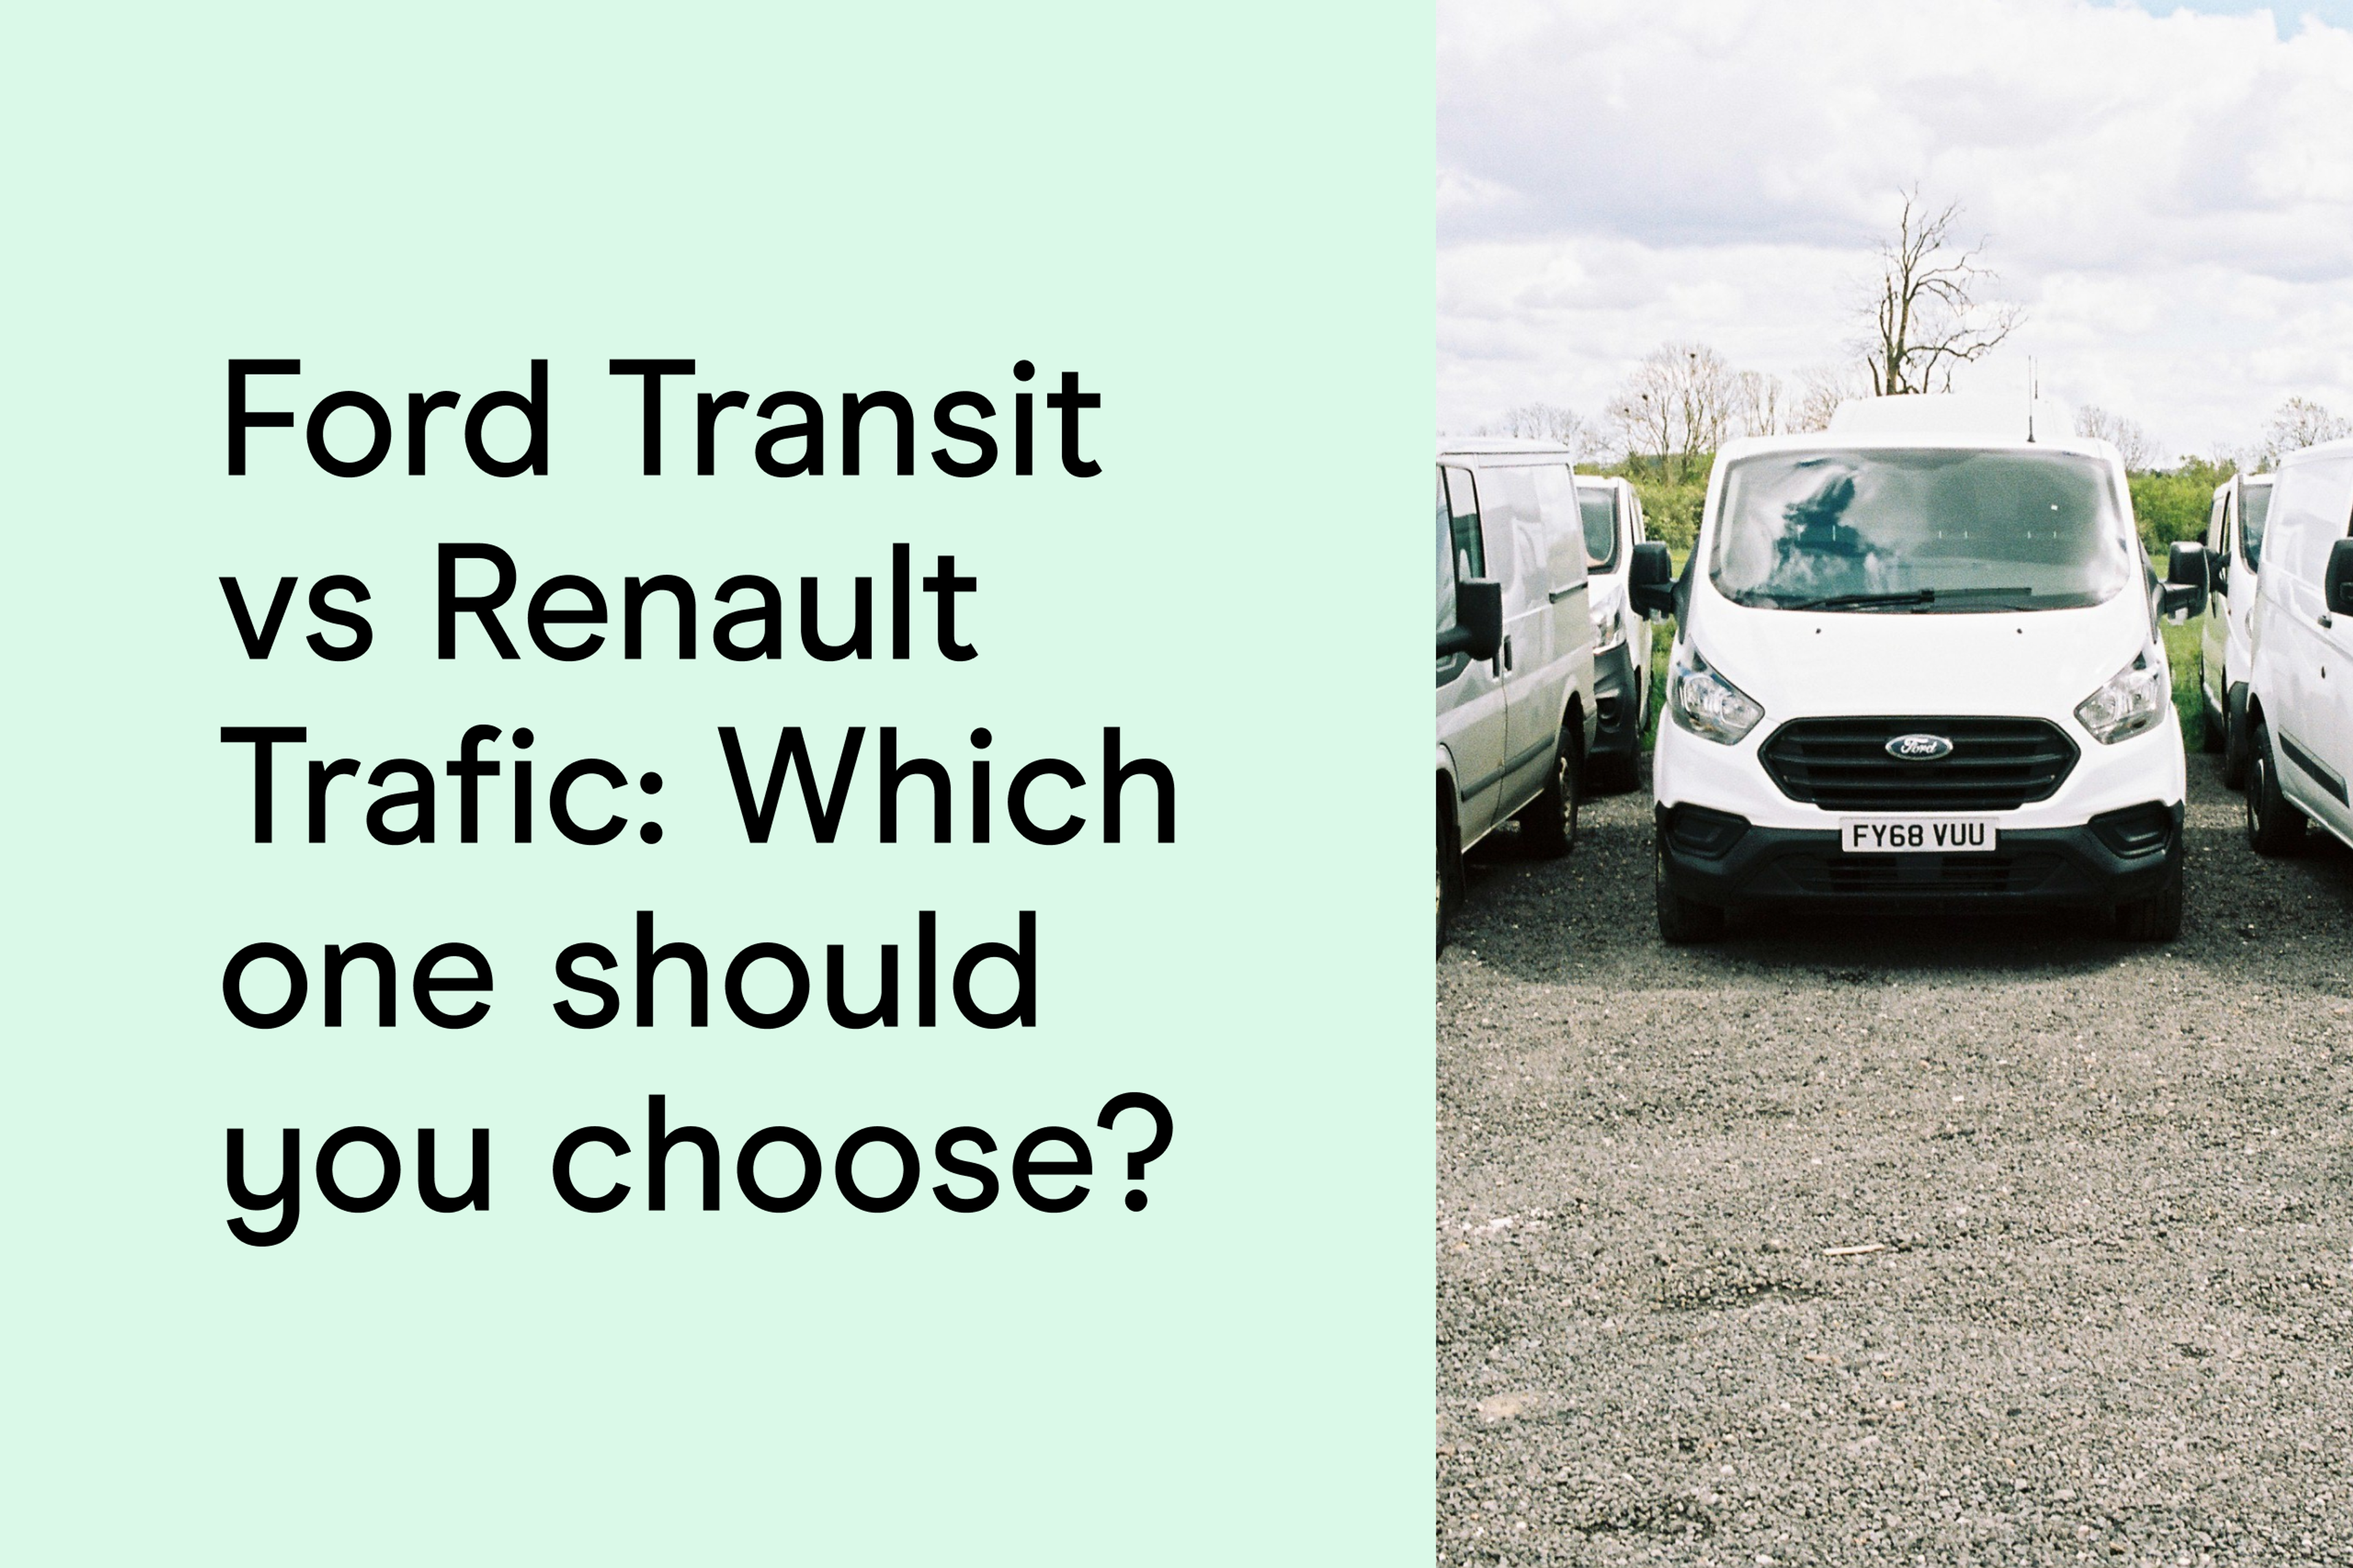 Ford Transit vs Renault Trafic: Which one should you choose?